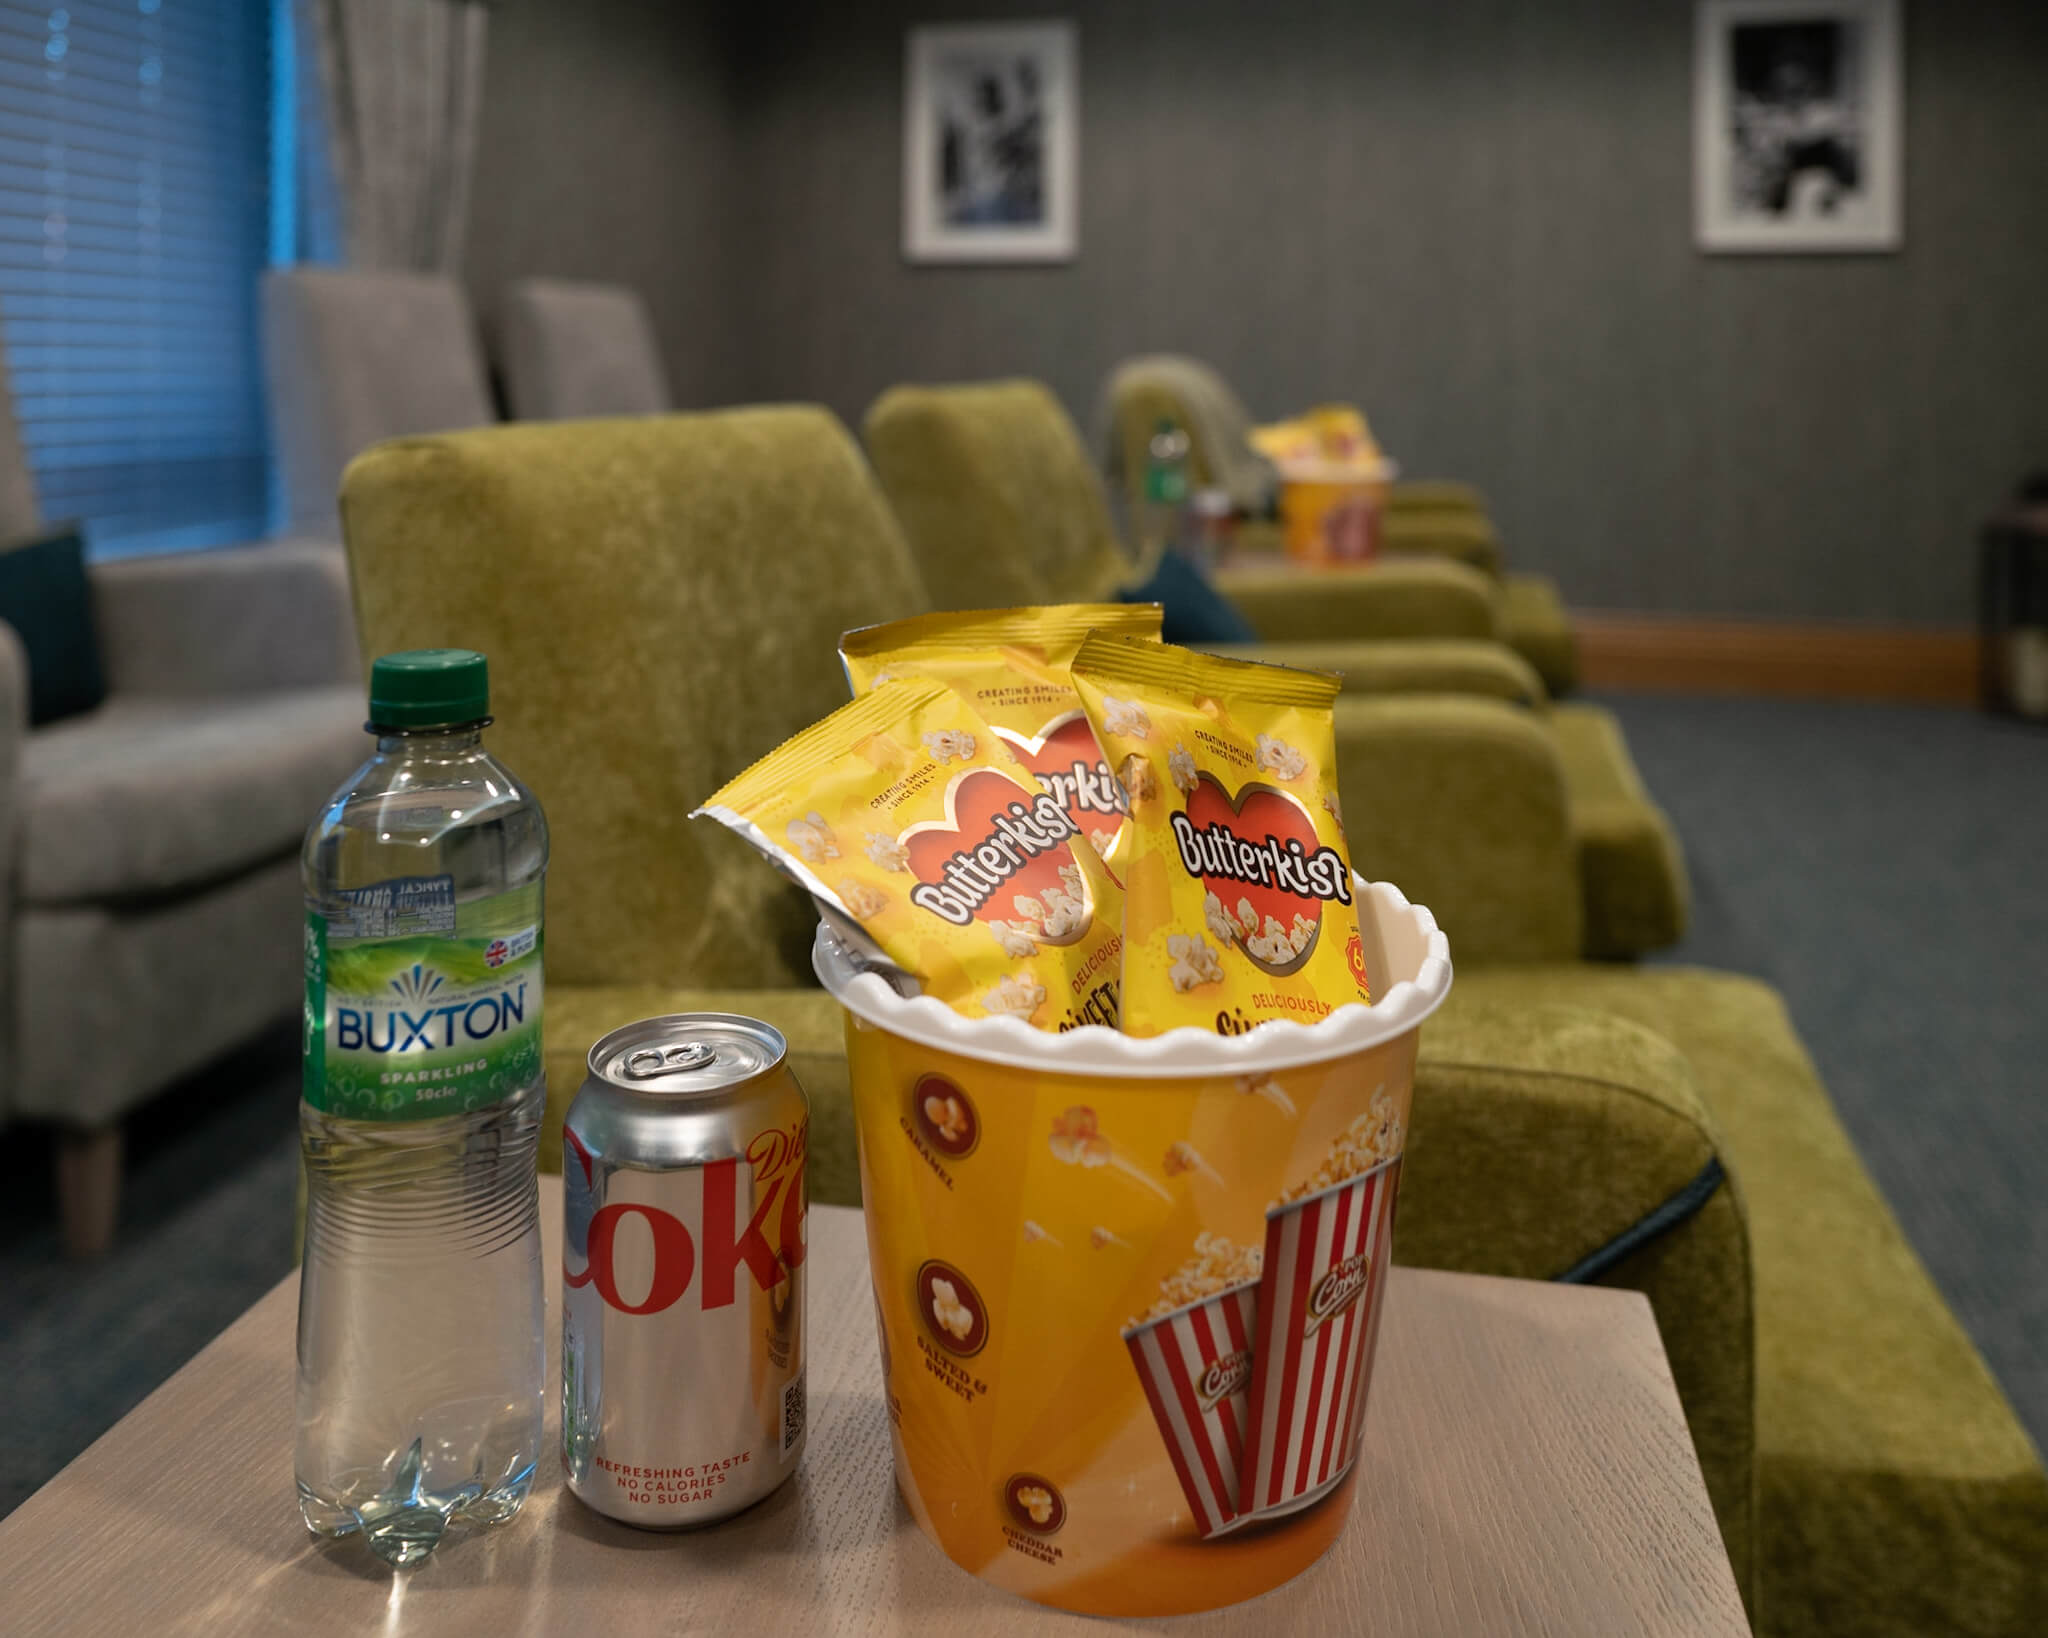 Popcorn and drinks in the cinema room